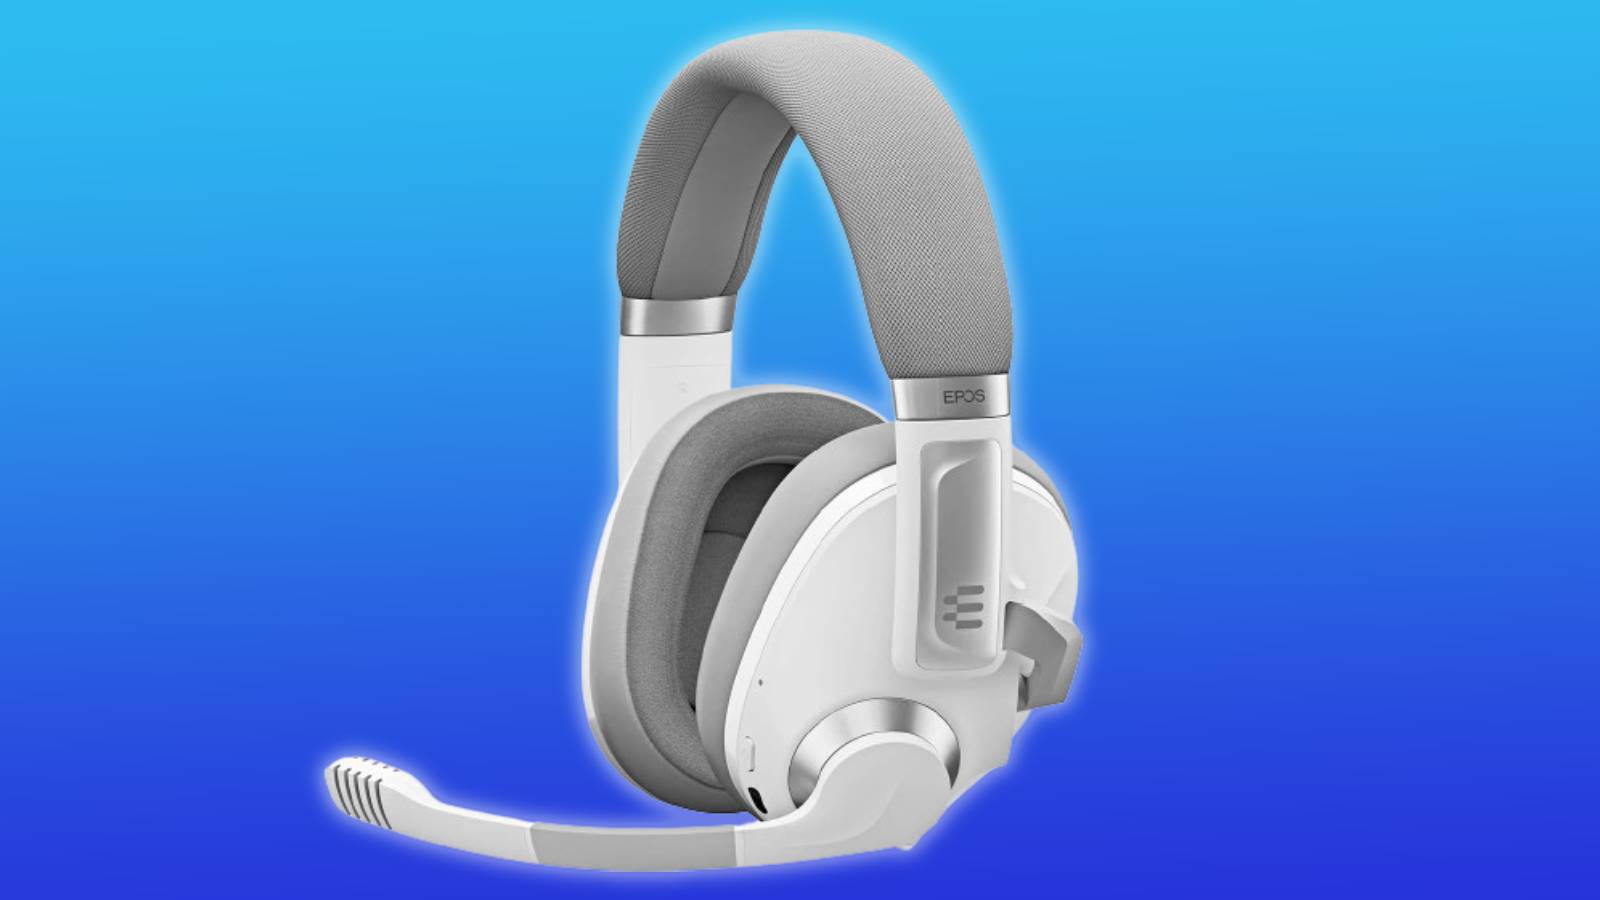 Image of the EPOS Gaming H3Pro Hybrid Gaming Headset on a blue background.